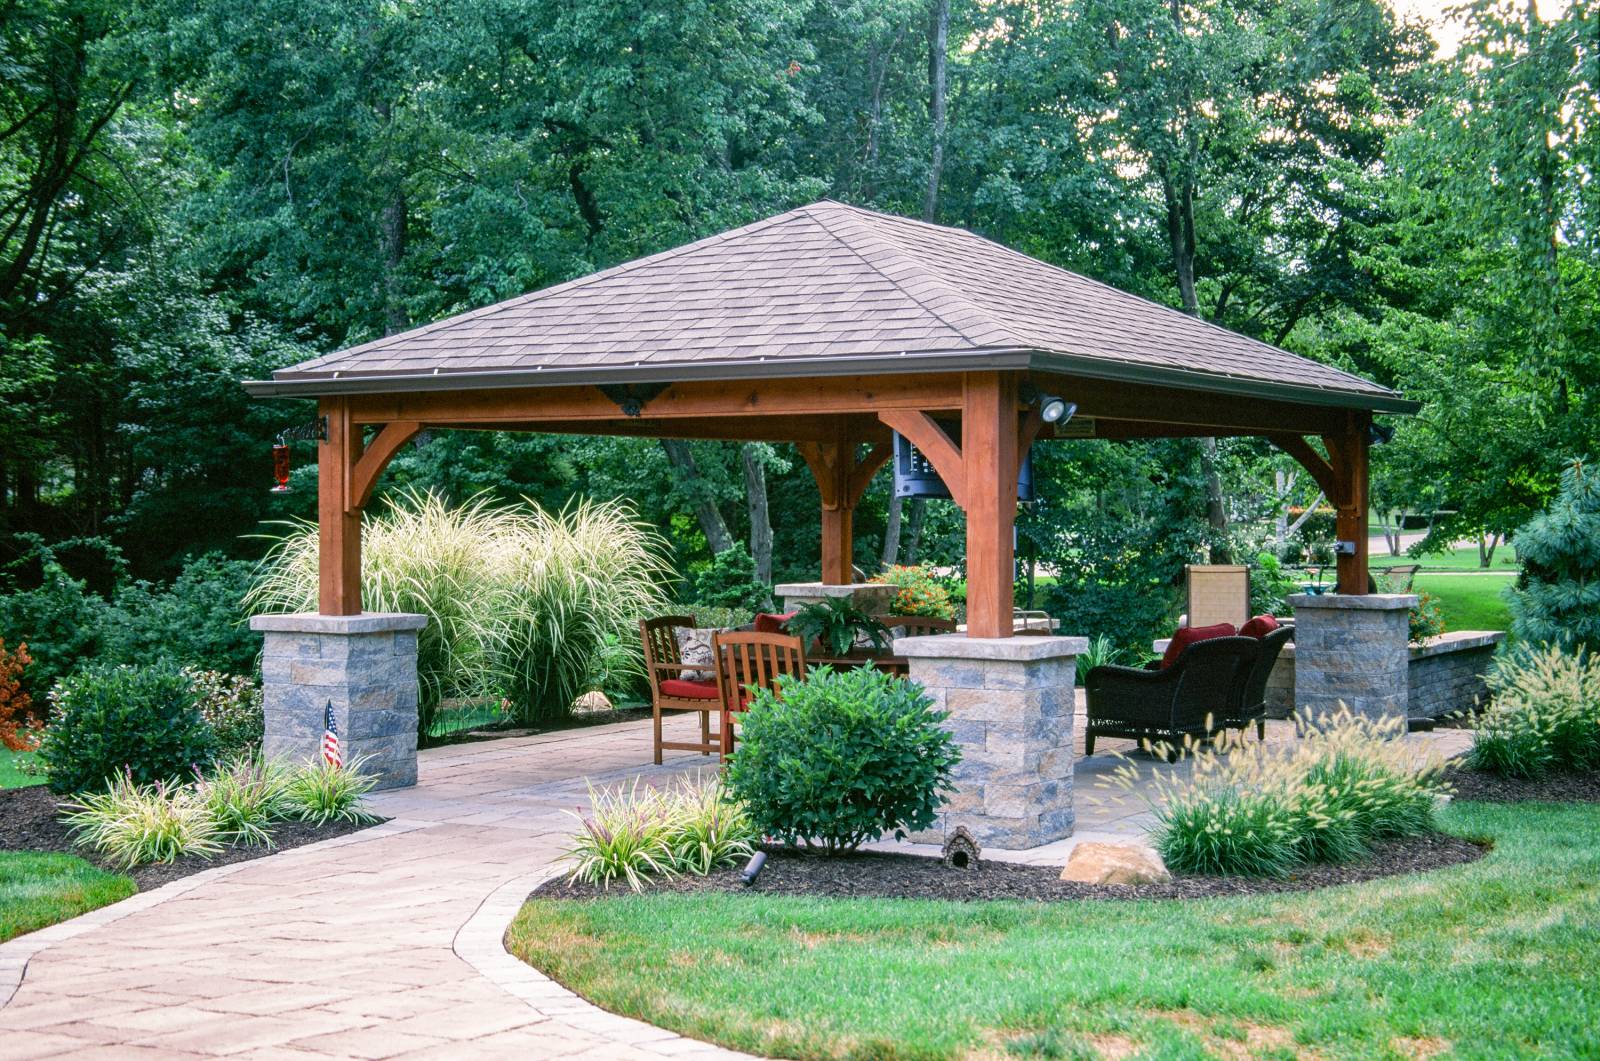 14' x 20' Easton Pavilion Shown with Options